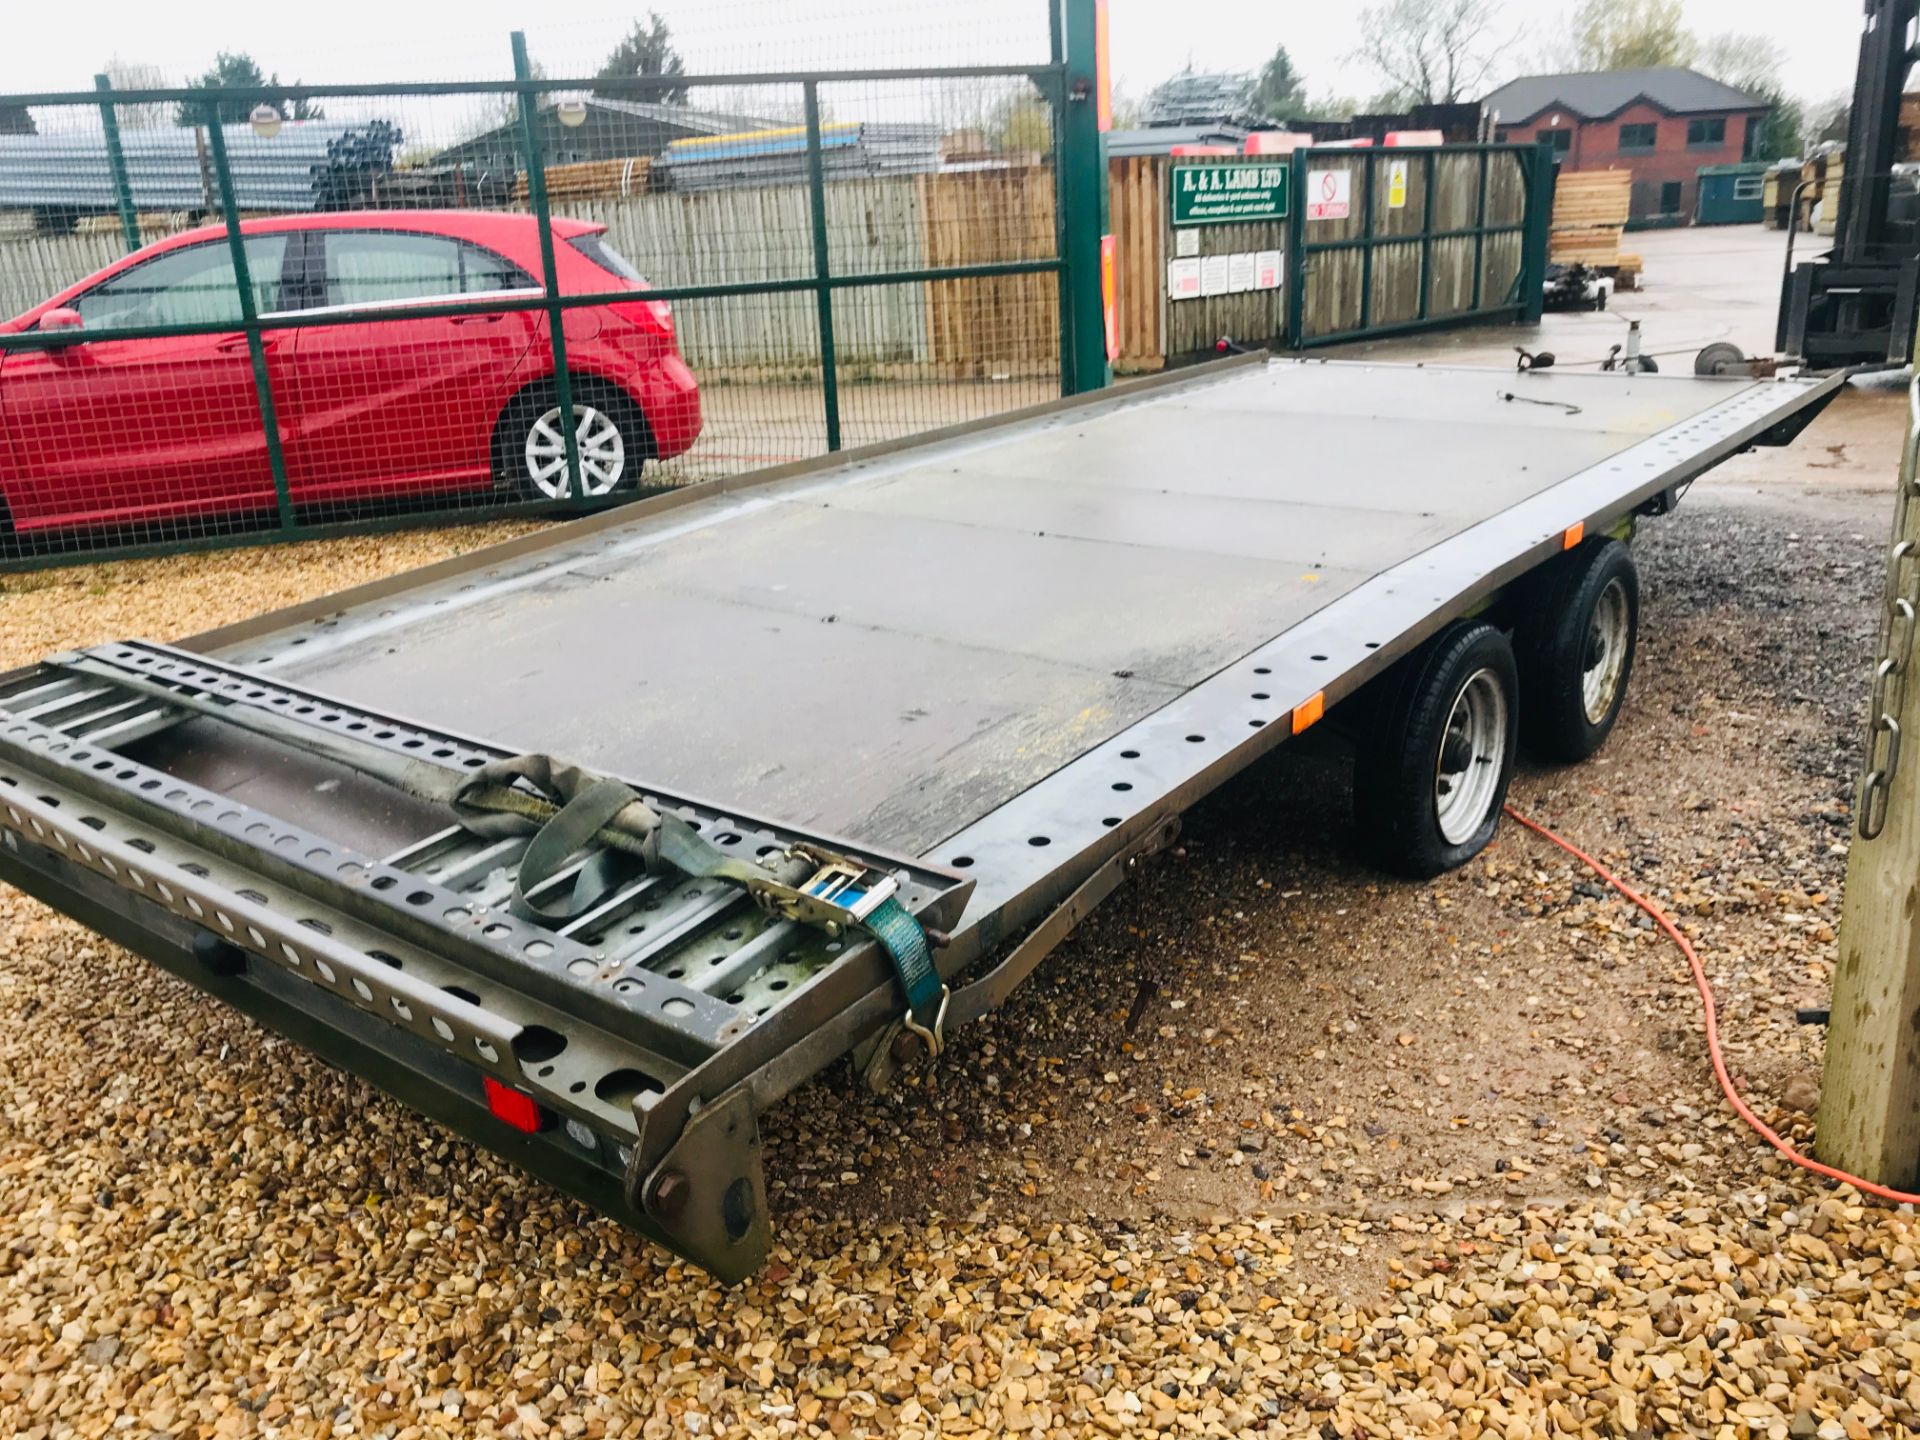 BRIAN JAMES 17 FOOT CAR TRANSPORTER / RECOVERY TRAILER - DOUBLE AXEL - LOADING RAMPS- LOOK!! NO VAT! - Image 2 of 6